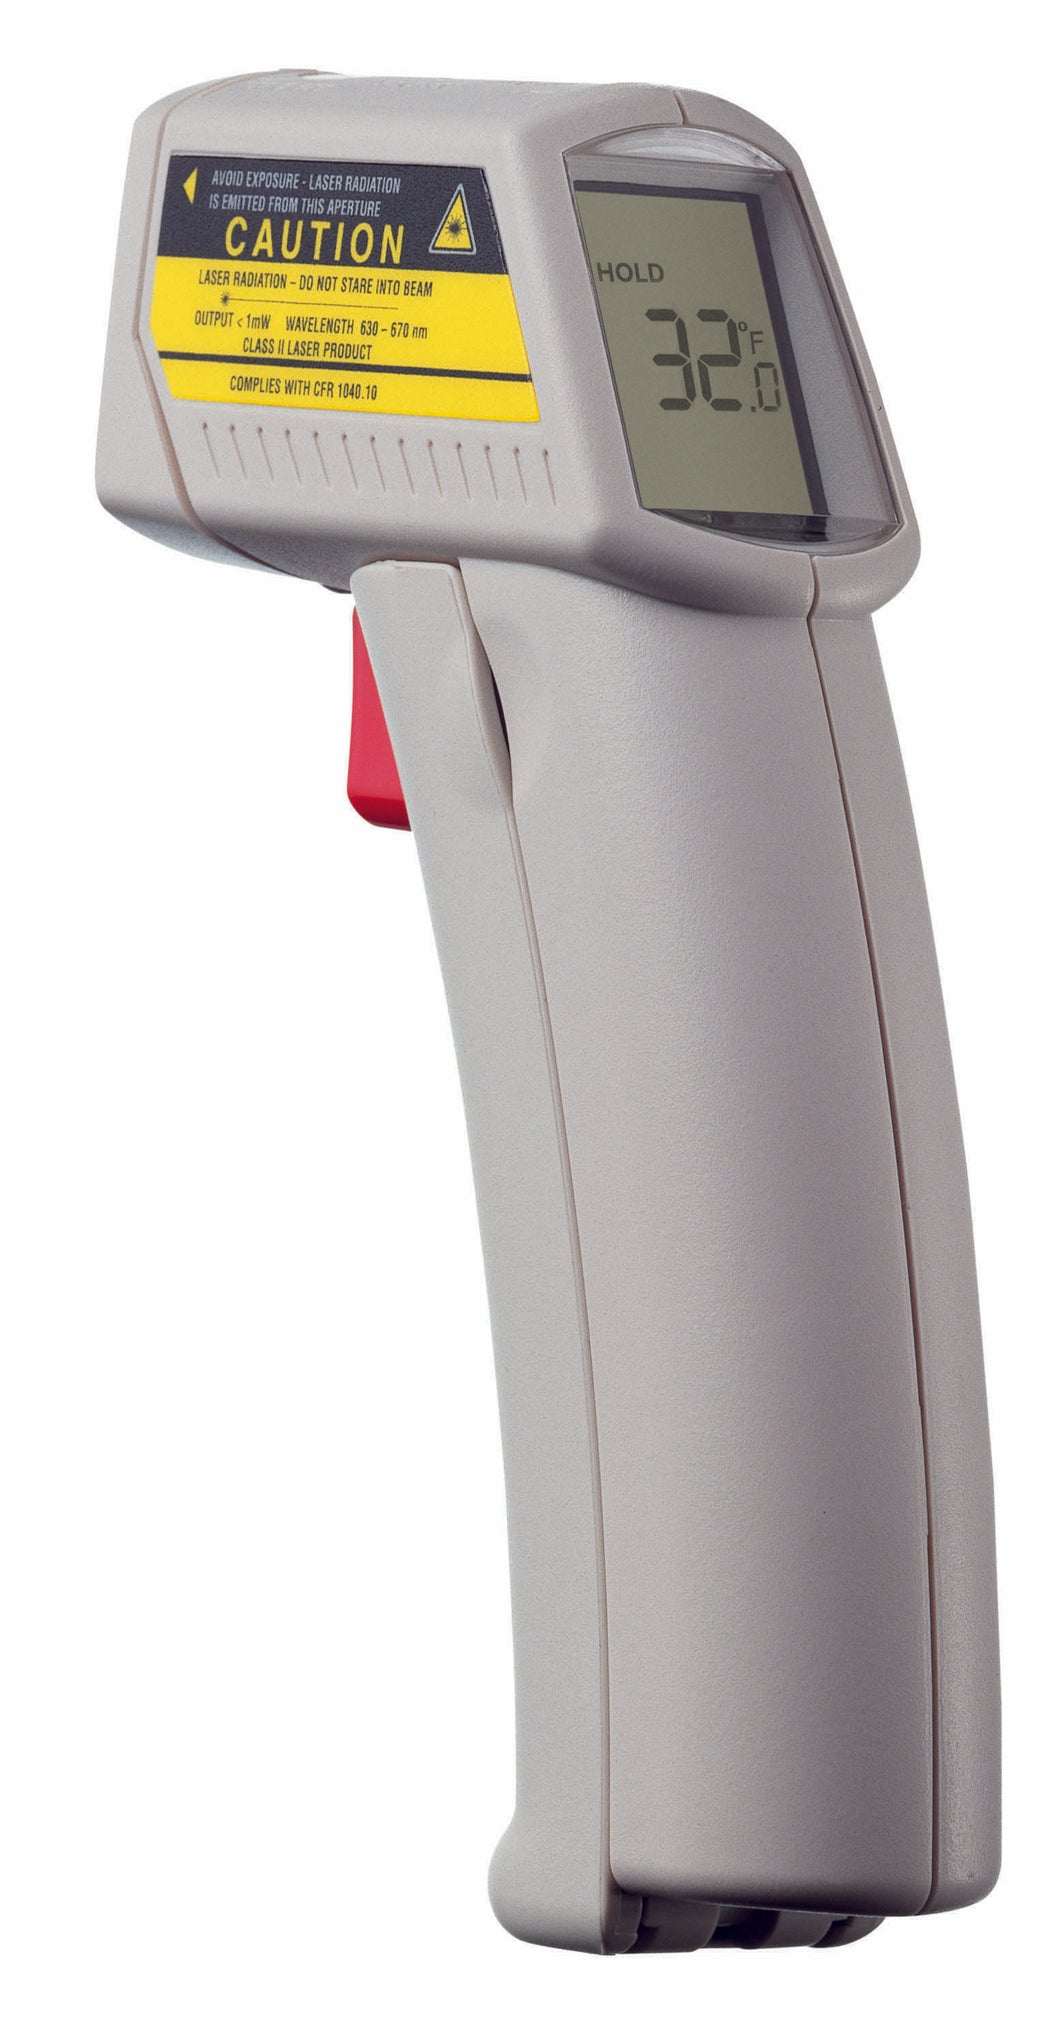 Clearance Centre - Comark - RAYMTFSU - Infrared Thermometer